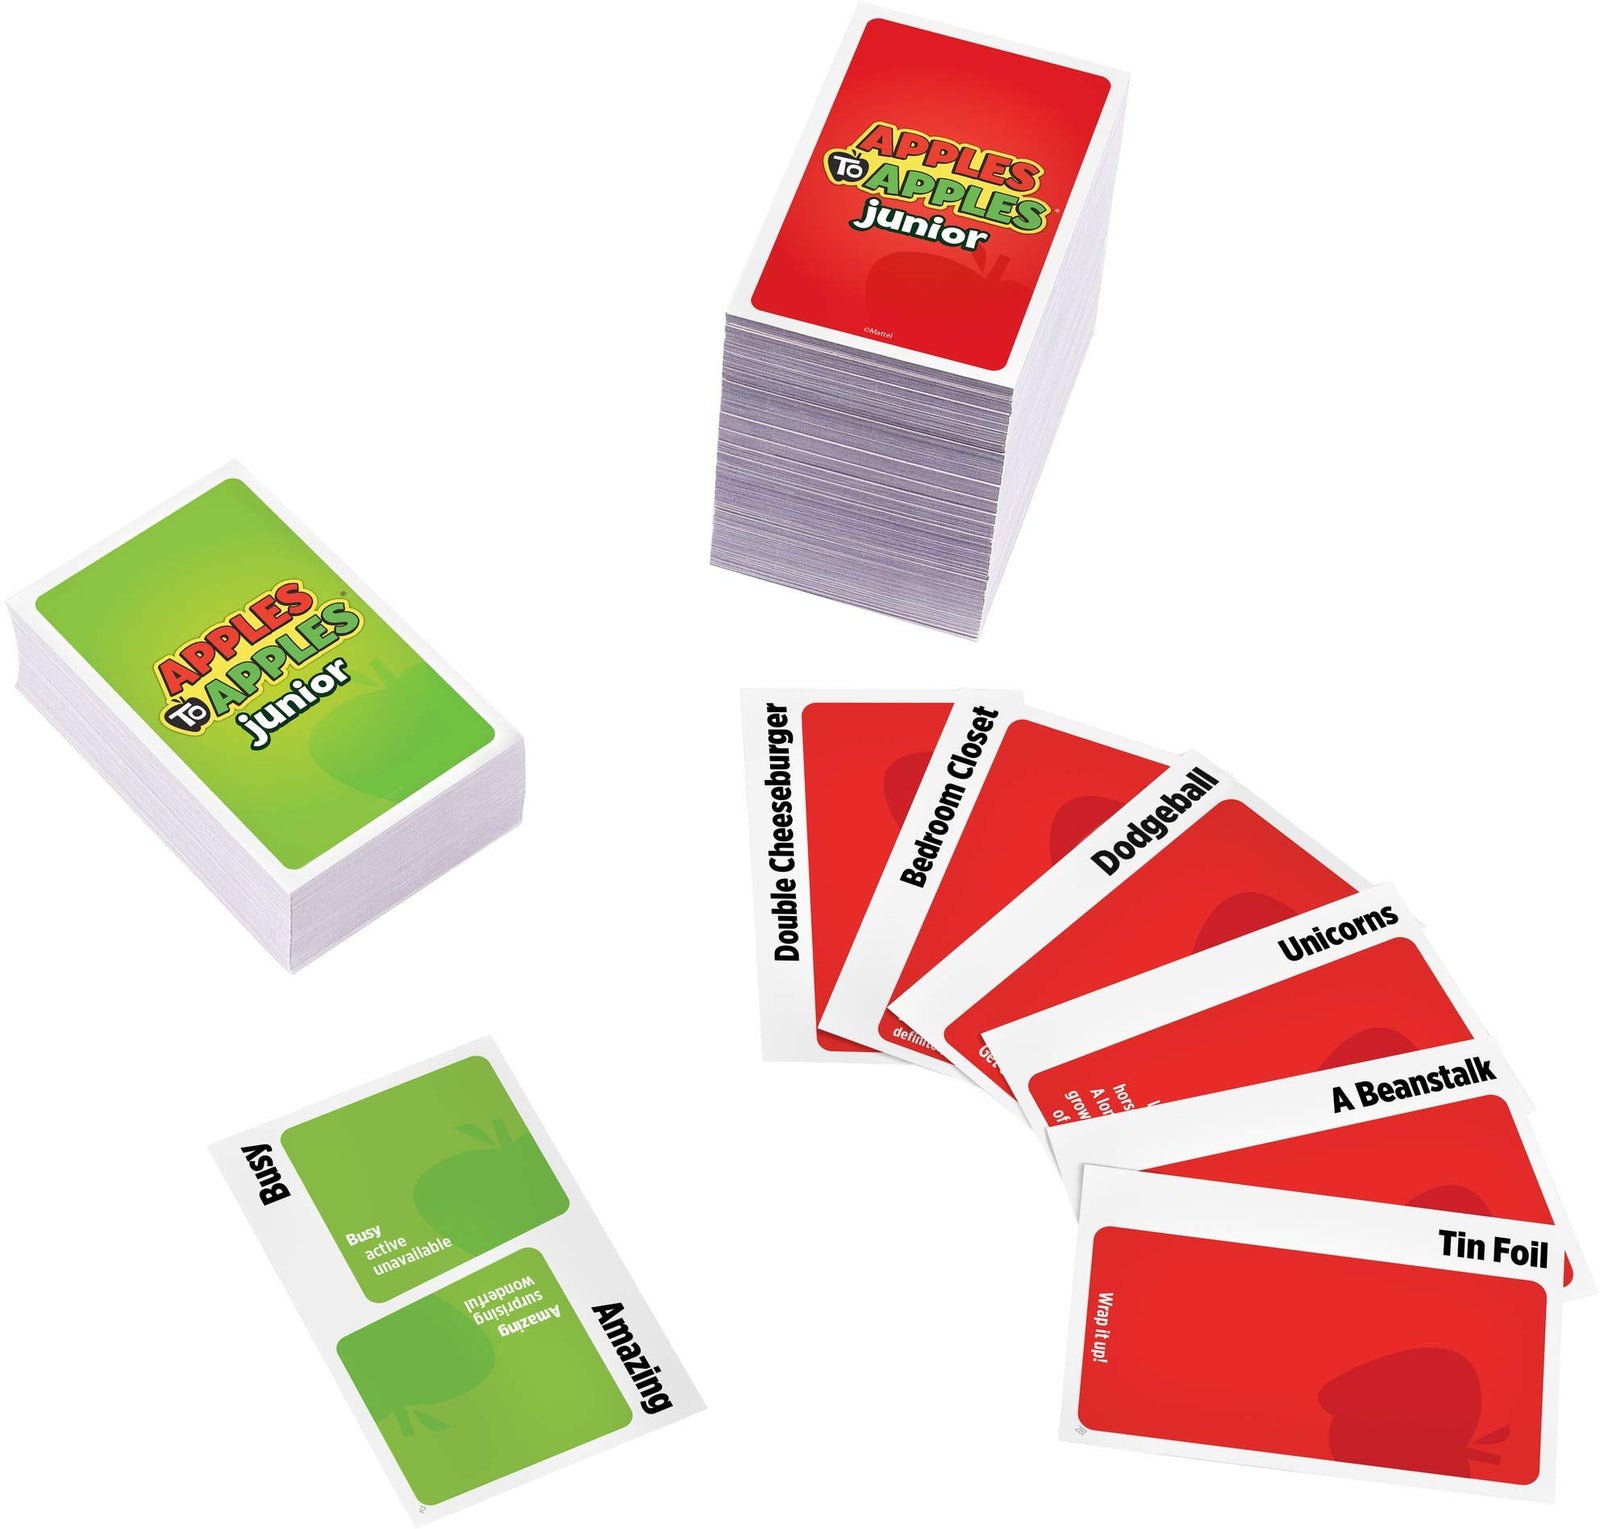 Mattel Apples to Apples Junior, The Game of Crazy Comparisons, Board Game with 504 Cards, Family Party Game Especially for Kids, Gift for Kid, Teen & Family Game Night Ages 9 Years & Older